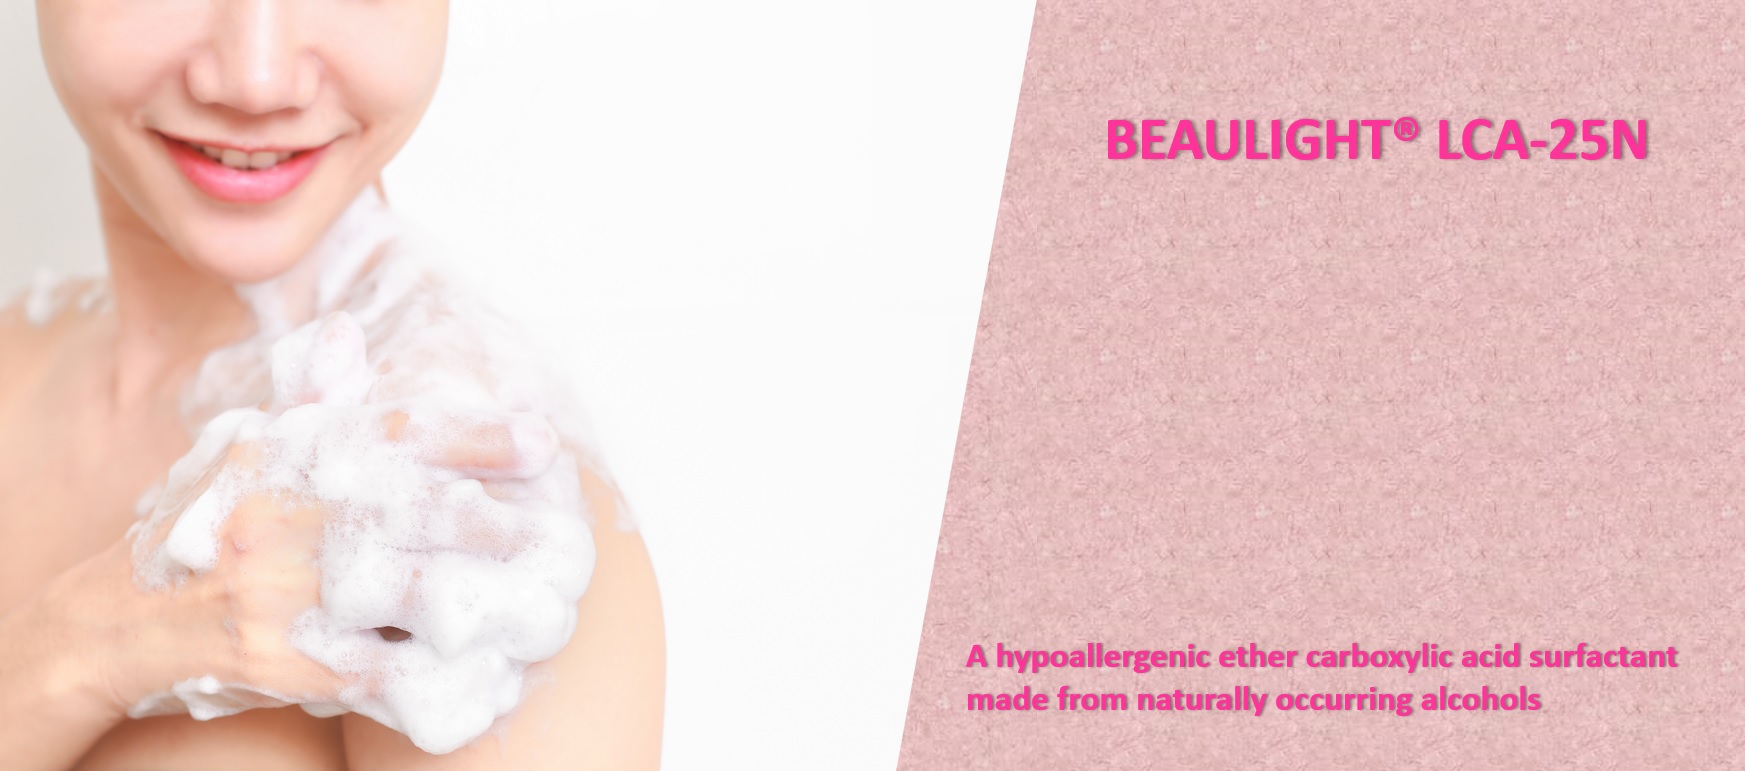 Biodegradable Ether Carboxylic Acid-based Hypoallergenic Detergent Base "BEAULIGHT® LCA-25N" page is now open